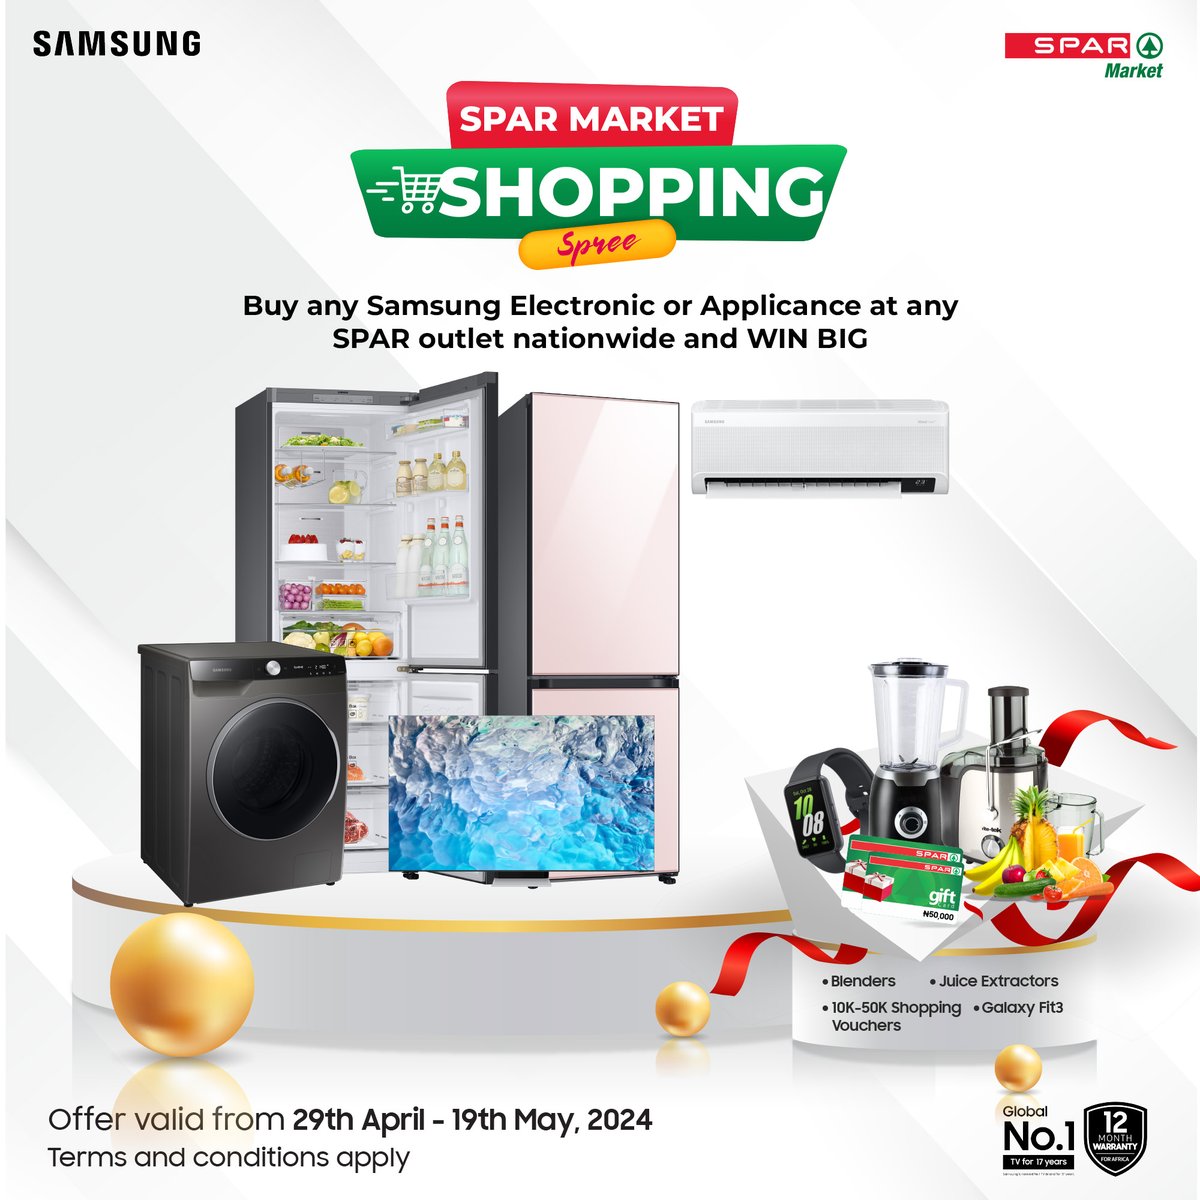 Looking for a chance to win BIG? Head to any SPAR outlets nationwide and purchase Samsung Electronics & Appliances for a chance to win incredible gifts worth up to ₦100,000. With every purchase, you get a scratch card to claim your gift instantly. #SamsungNigeria